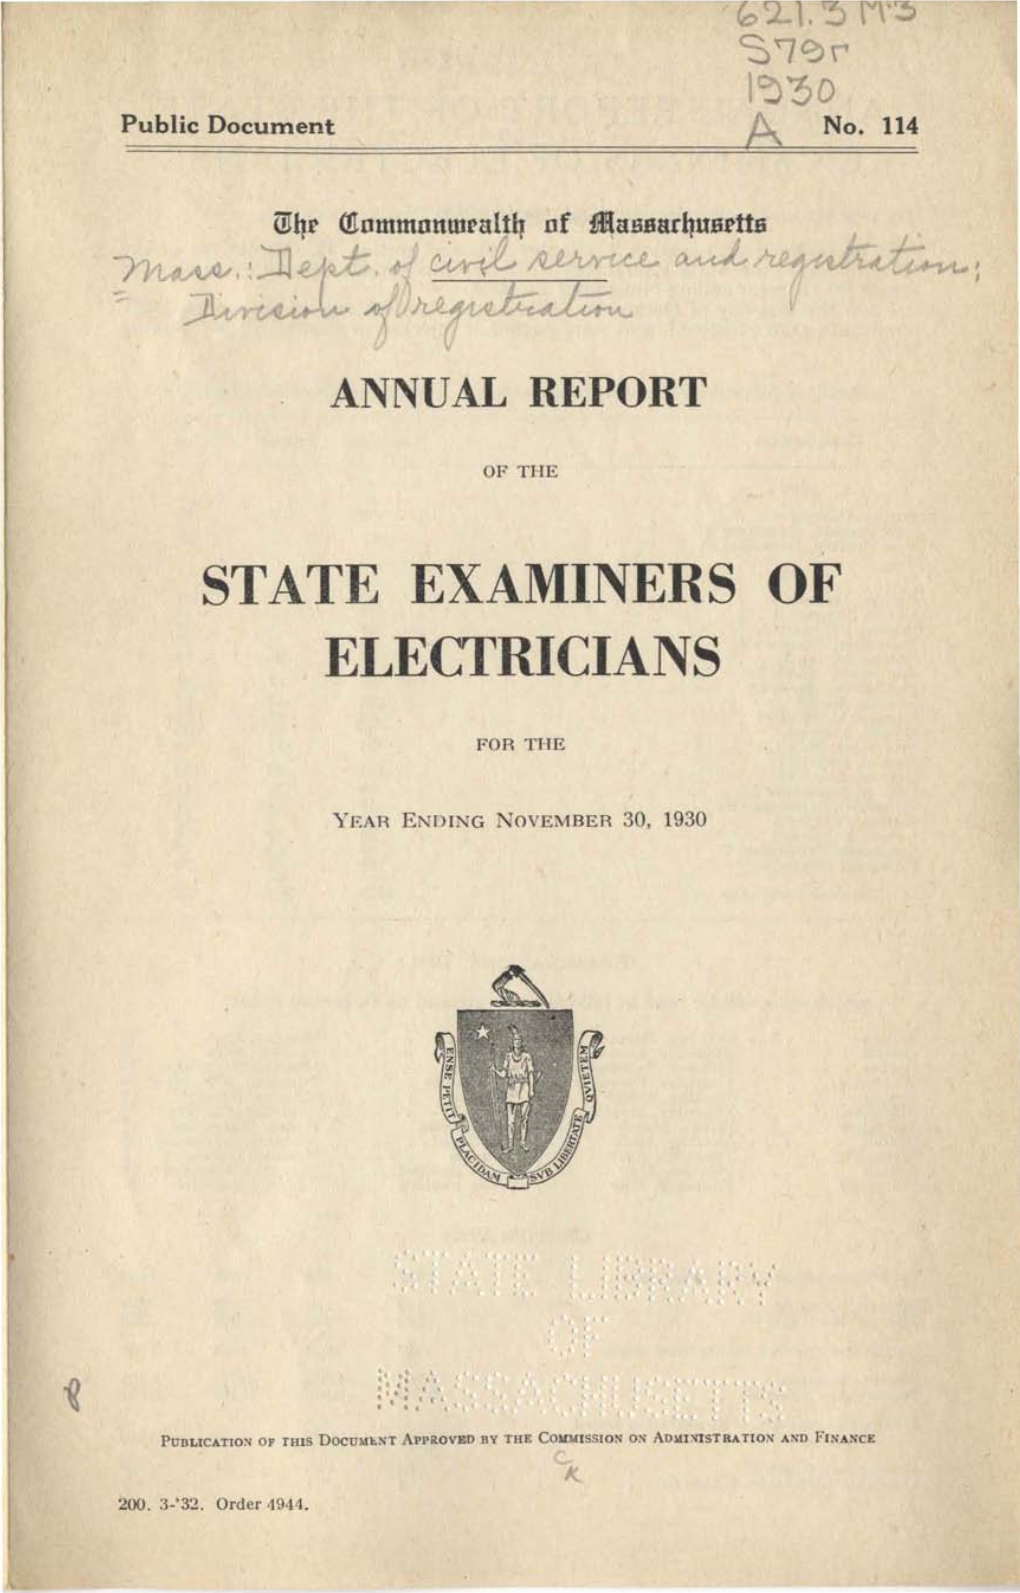 State Examiners of Electricians